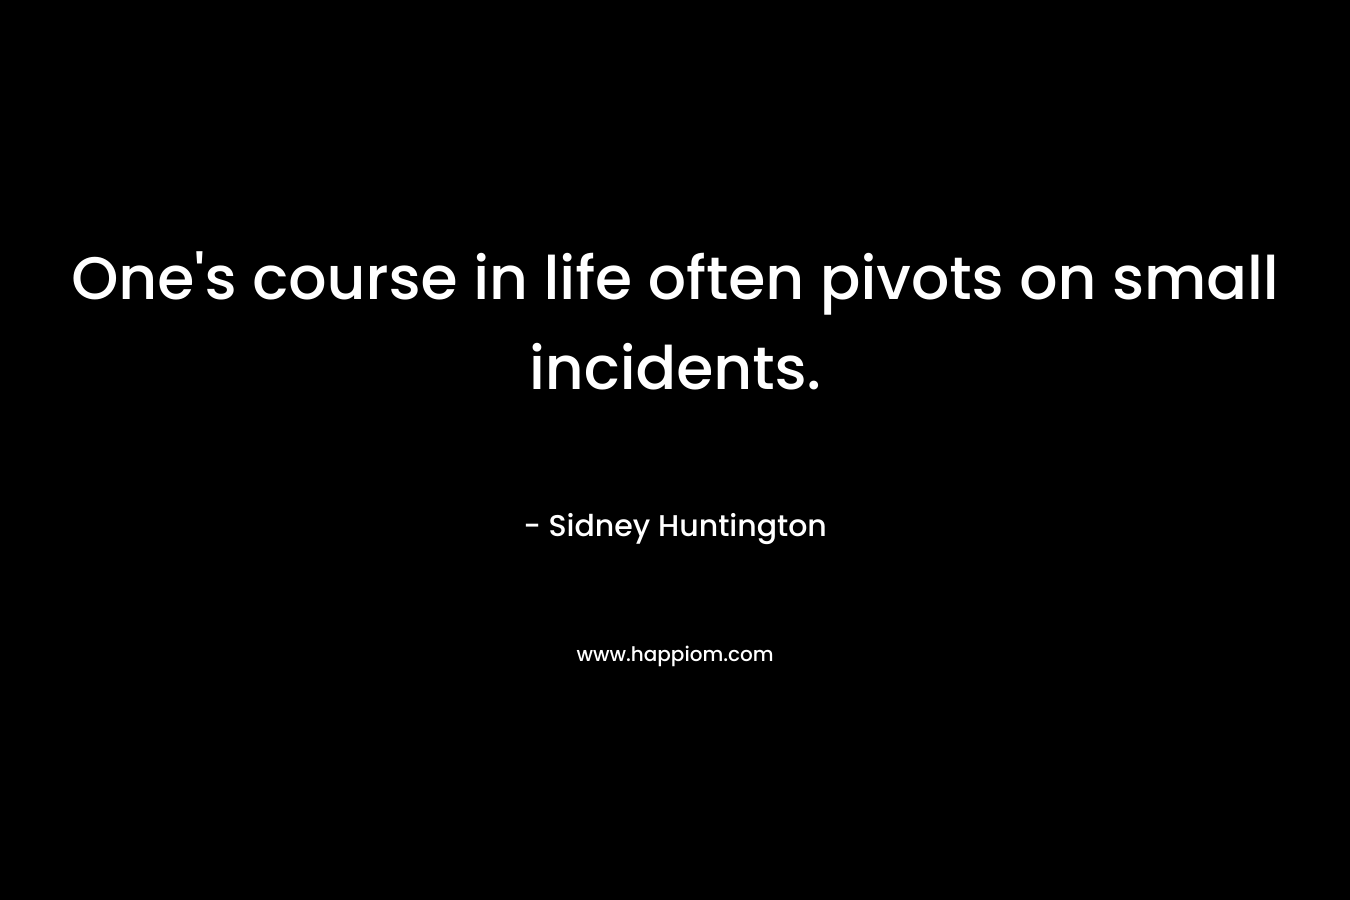 One’s course in life often pivots on small incidents. – Sidney Huntington